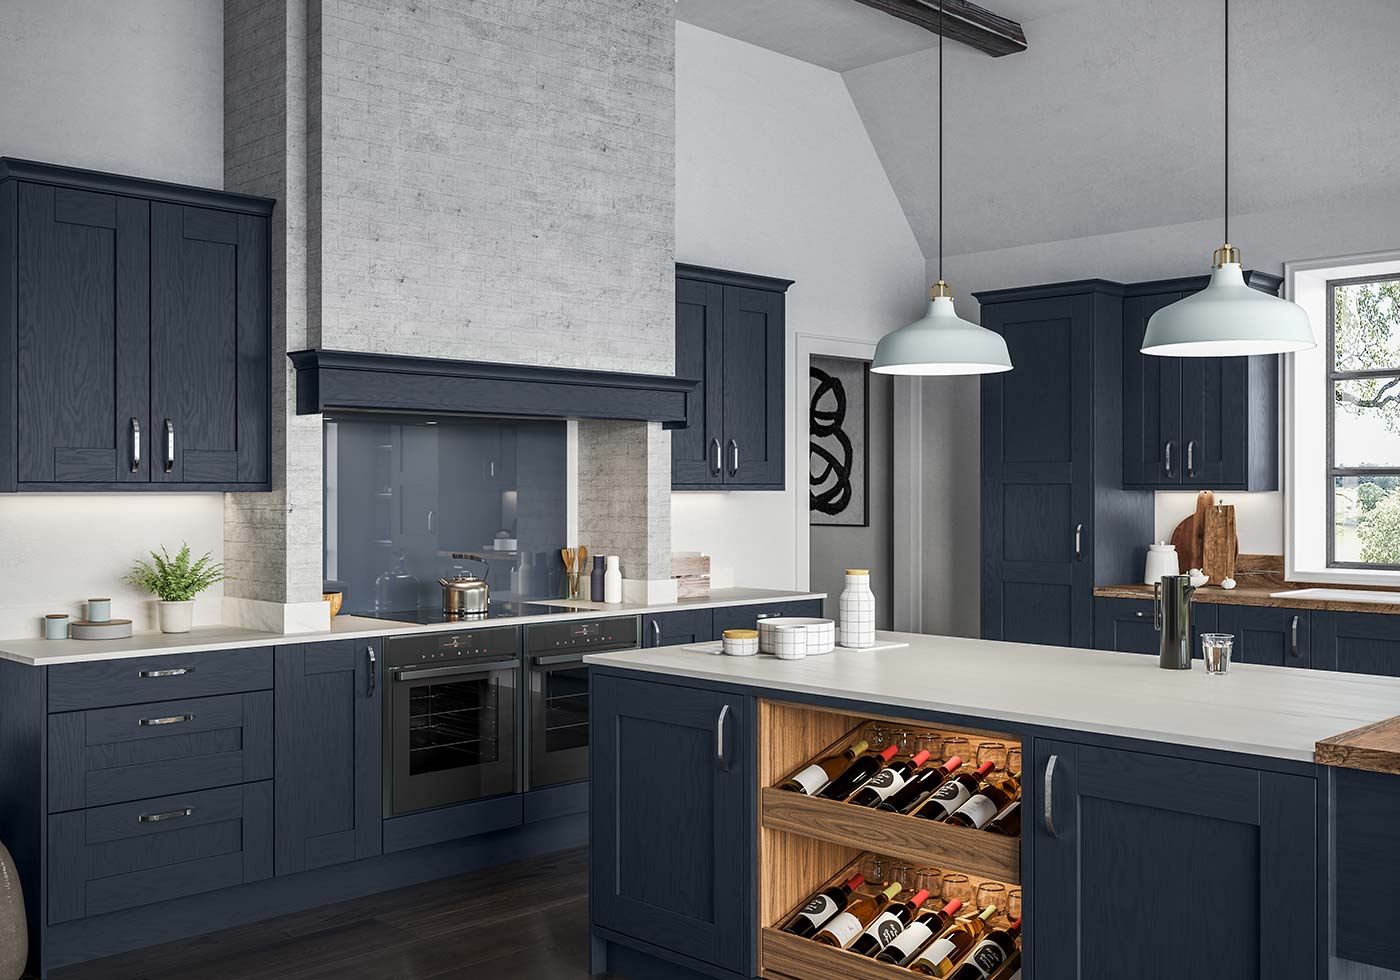 kitchen idea with navy blue wall